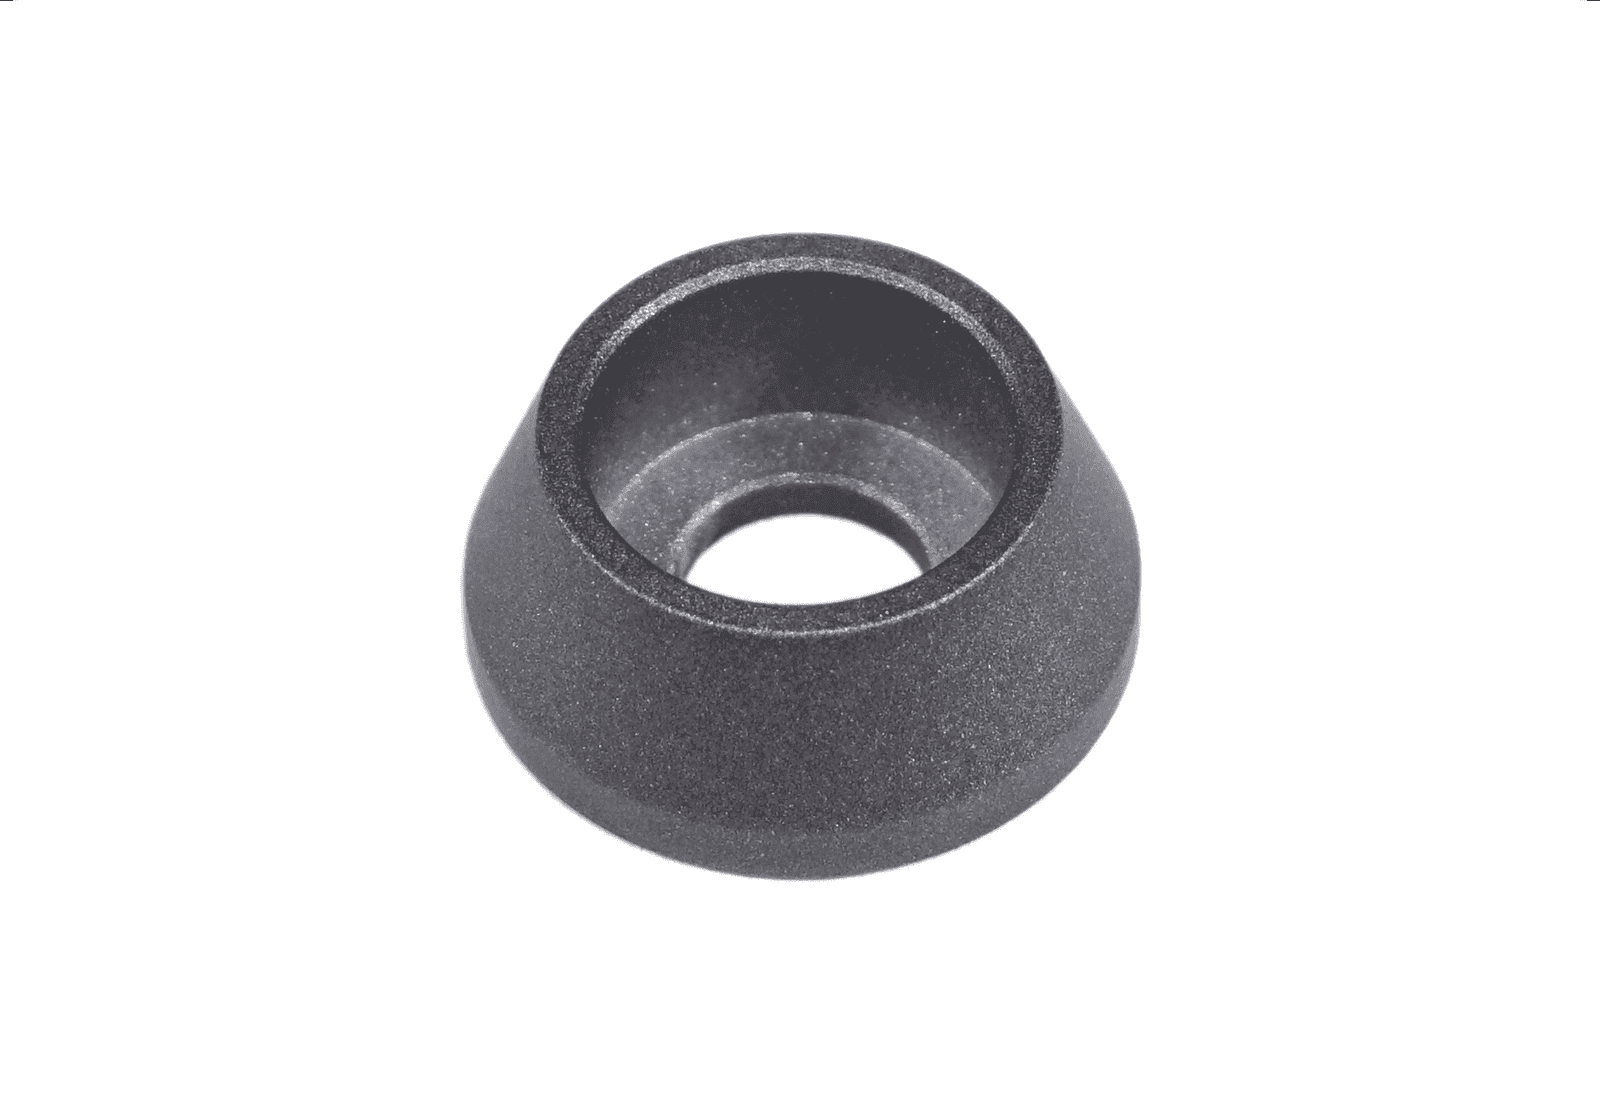 ZSPEC M5 Billet Angled-Cup Finish Washers for SHSC Socket-Cap Fasteners, 10-Pack